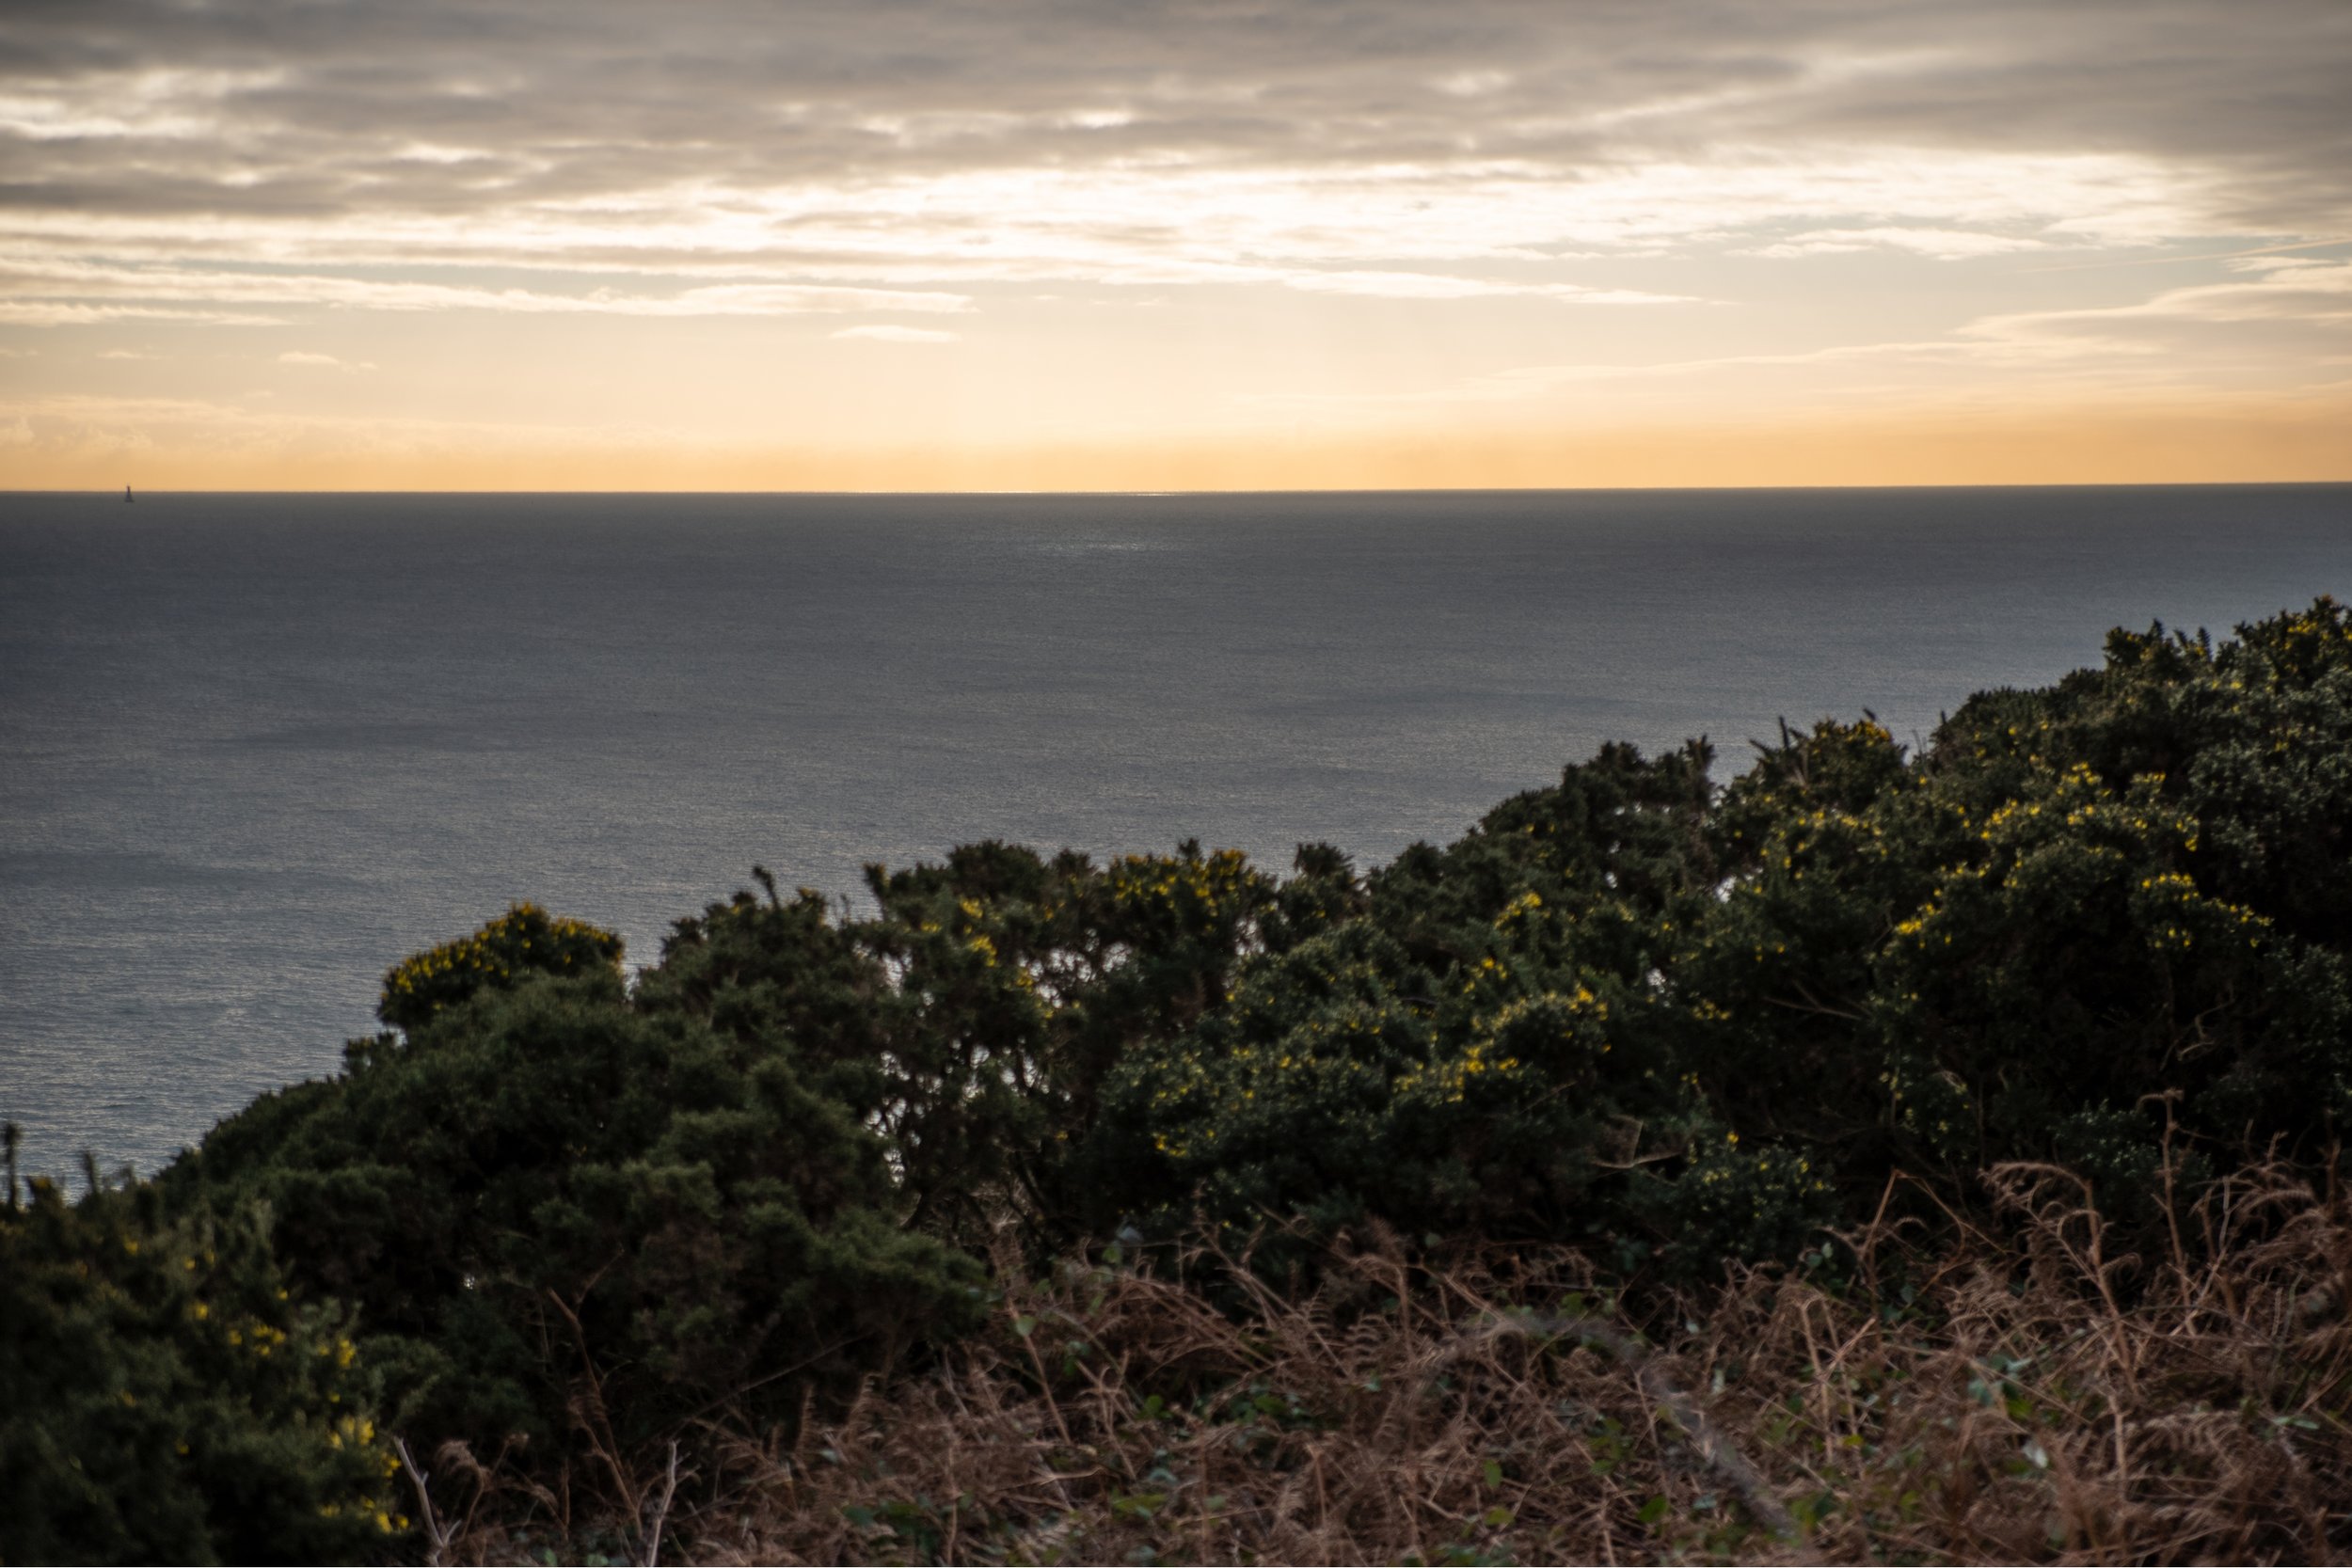 Landscape Photography at Howth Cliffwalk, Ireland